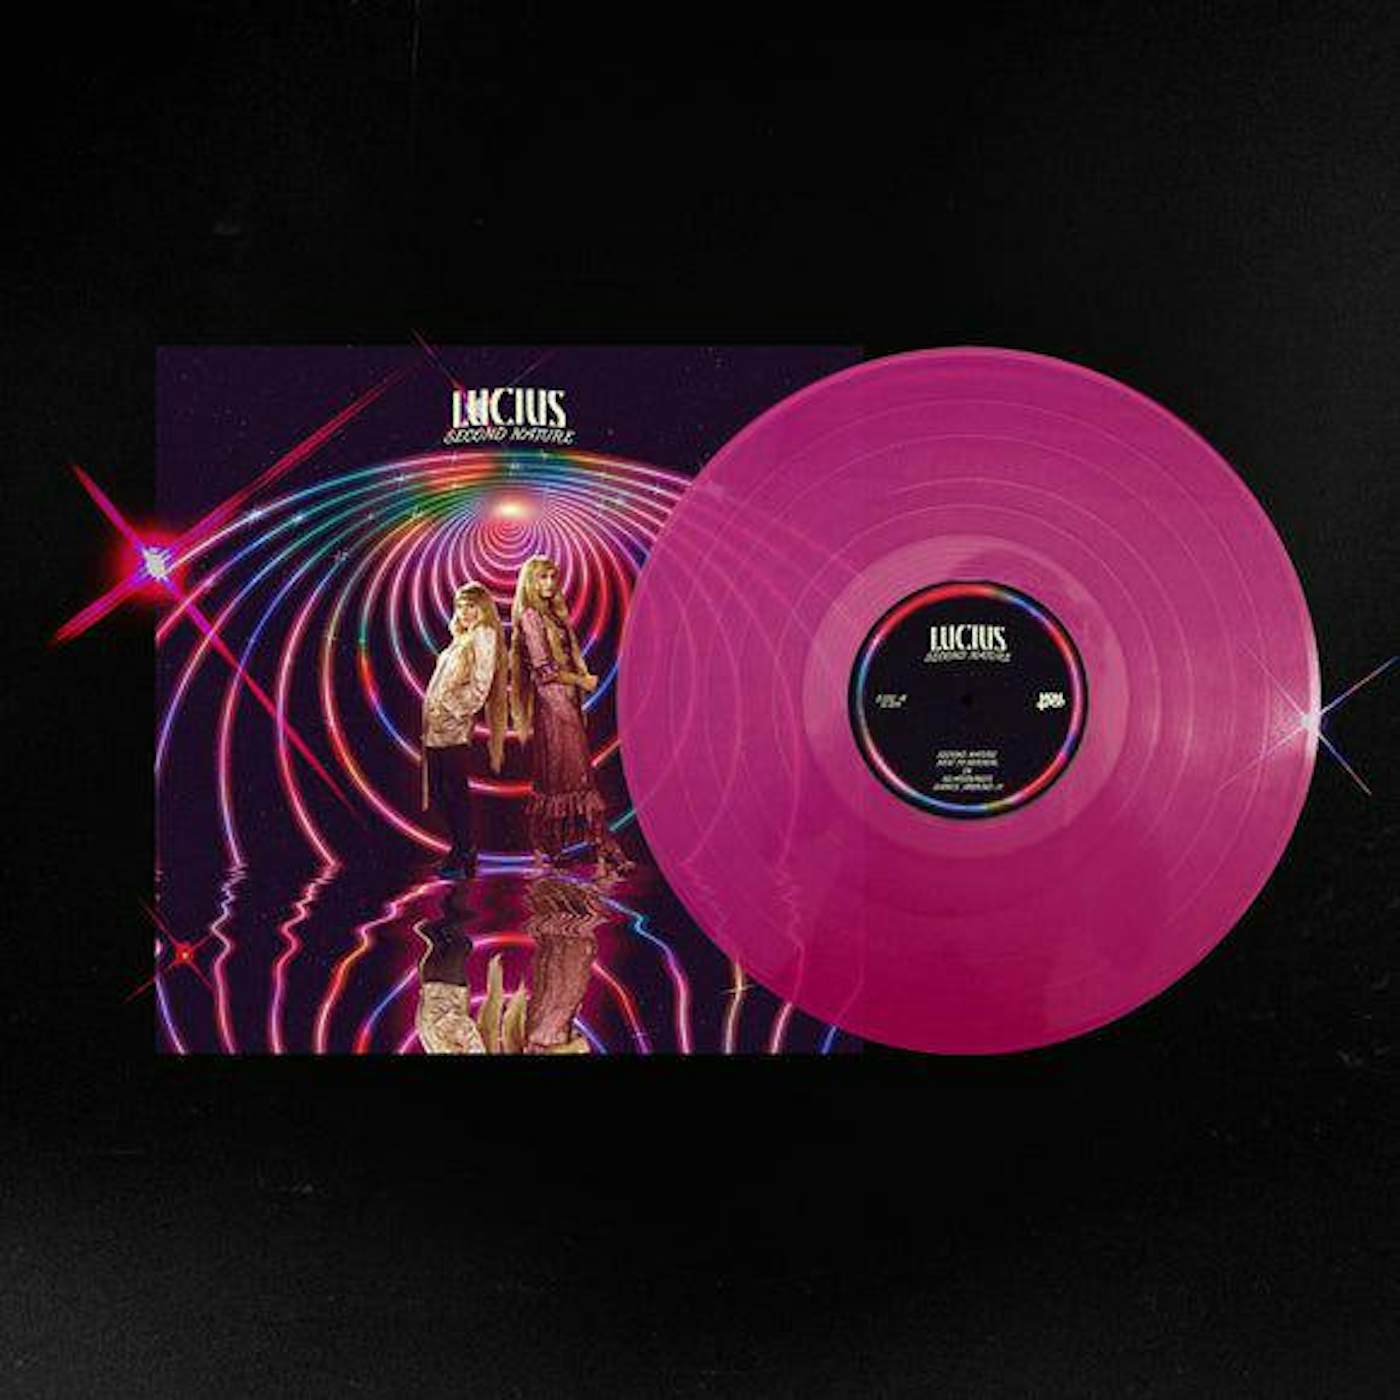 Lucius Second Nature (Clear Pink) Vinyl Record